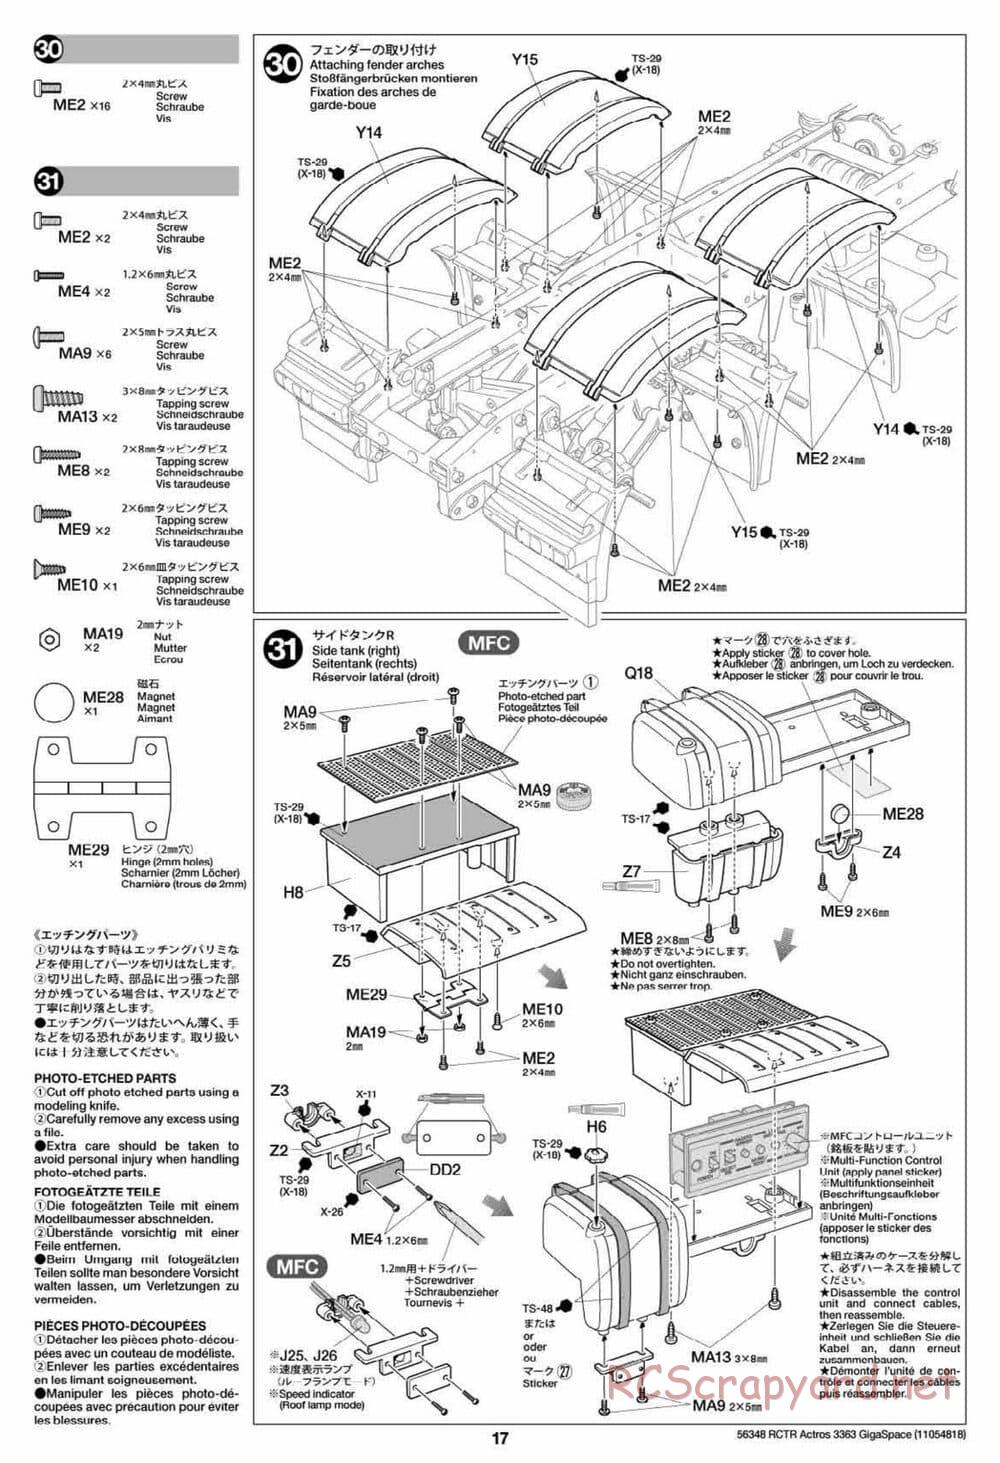 Tamiya - Mercedes-Benz Actros 3363 6x4 GigaSpace Tractor Truck Chassis - Manual - Page 17